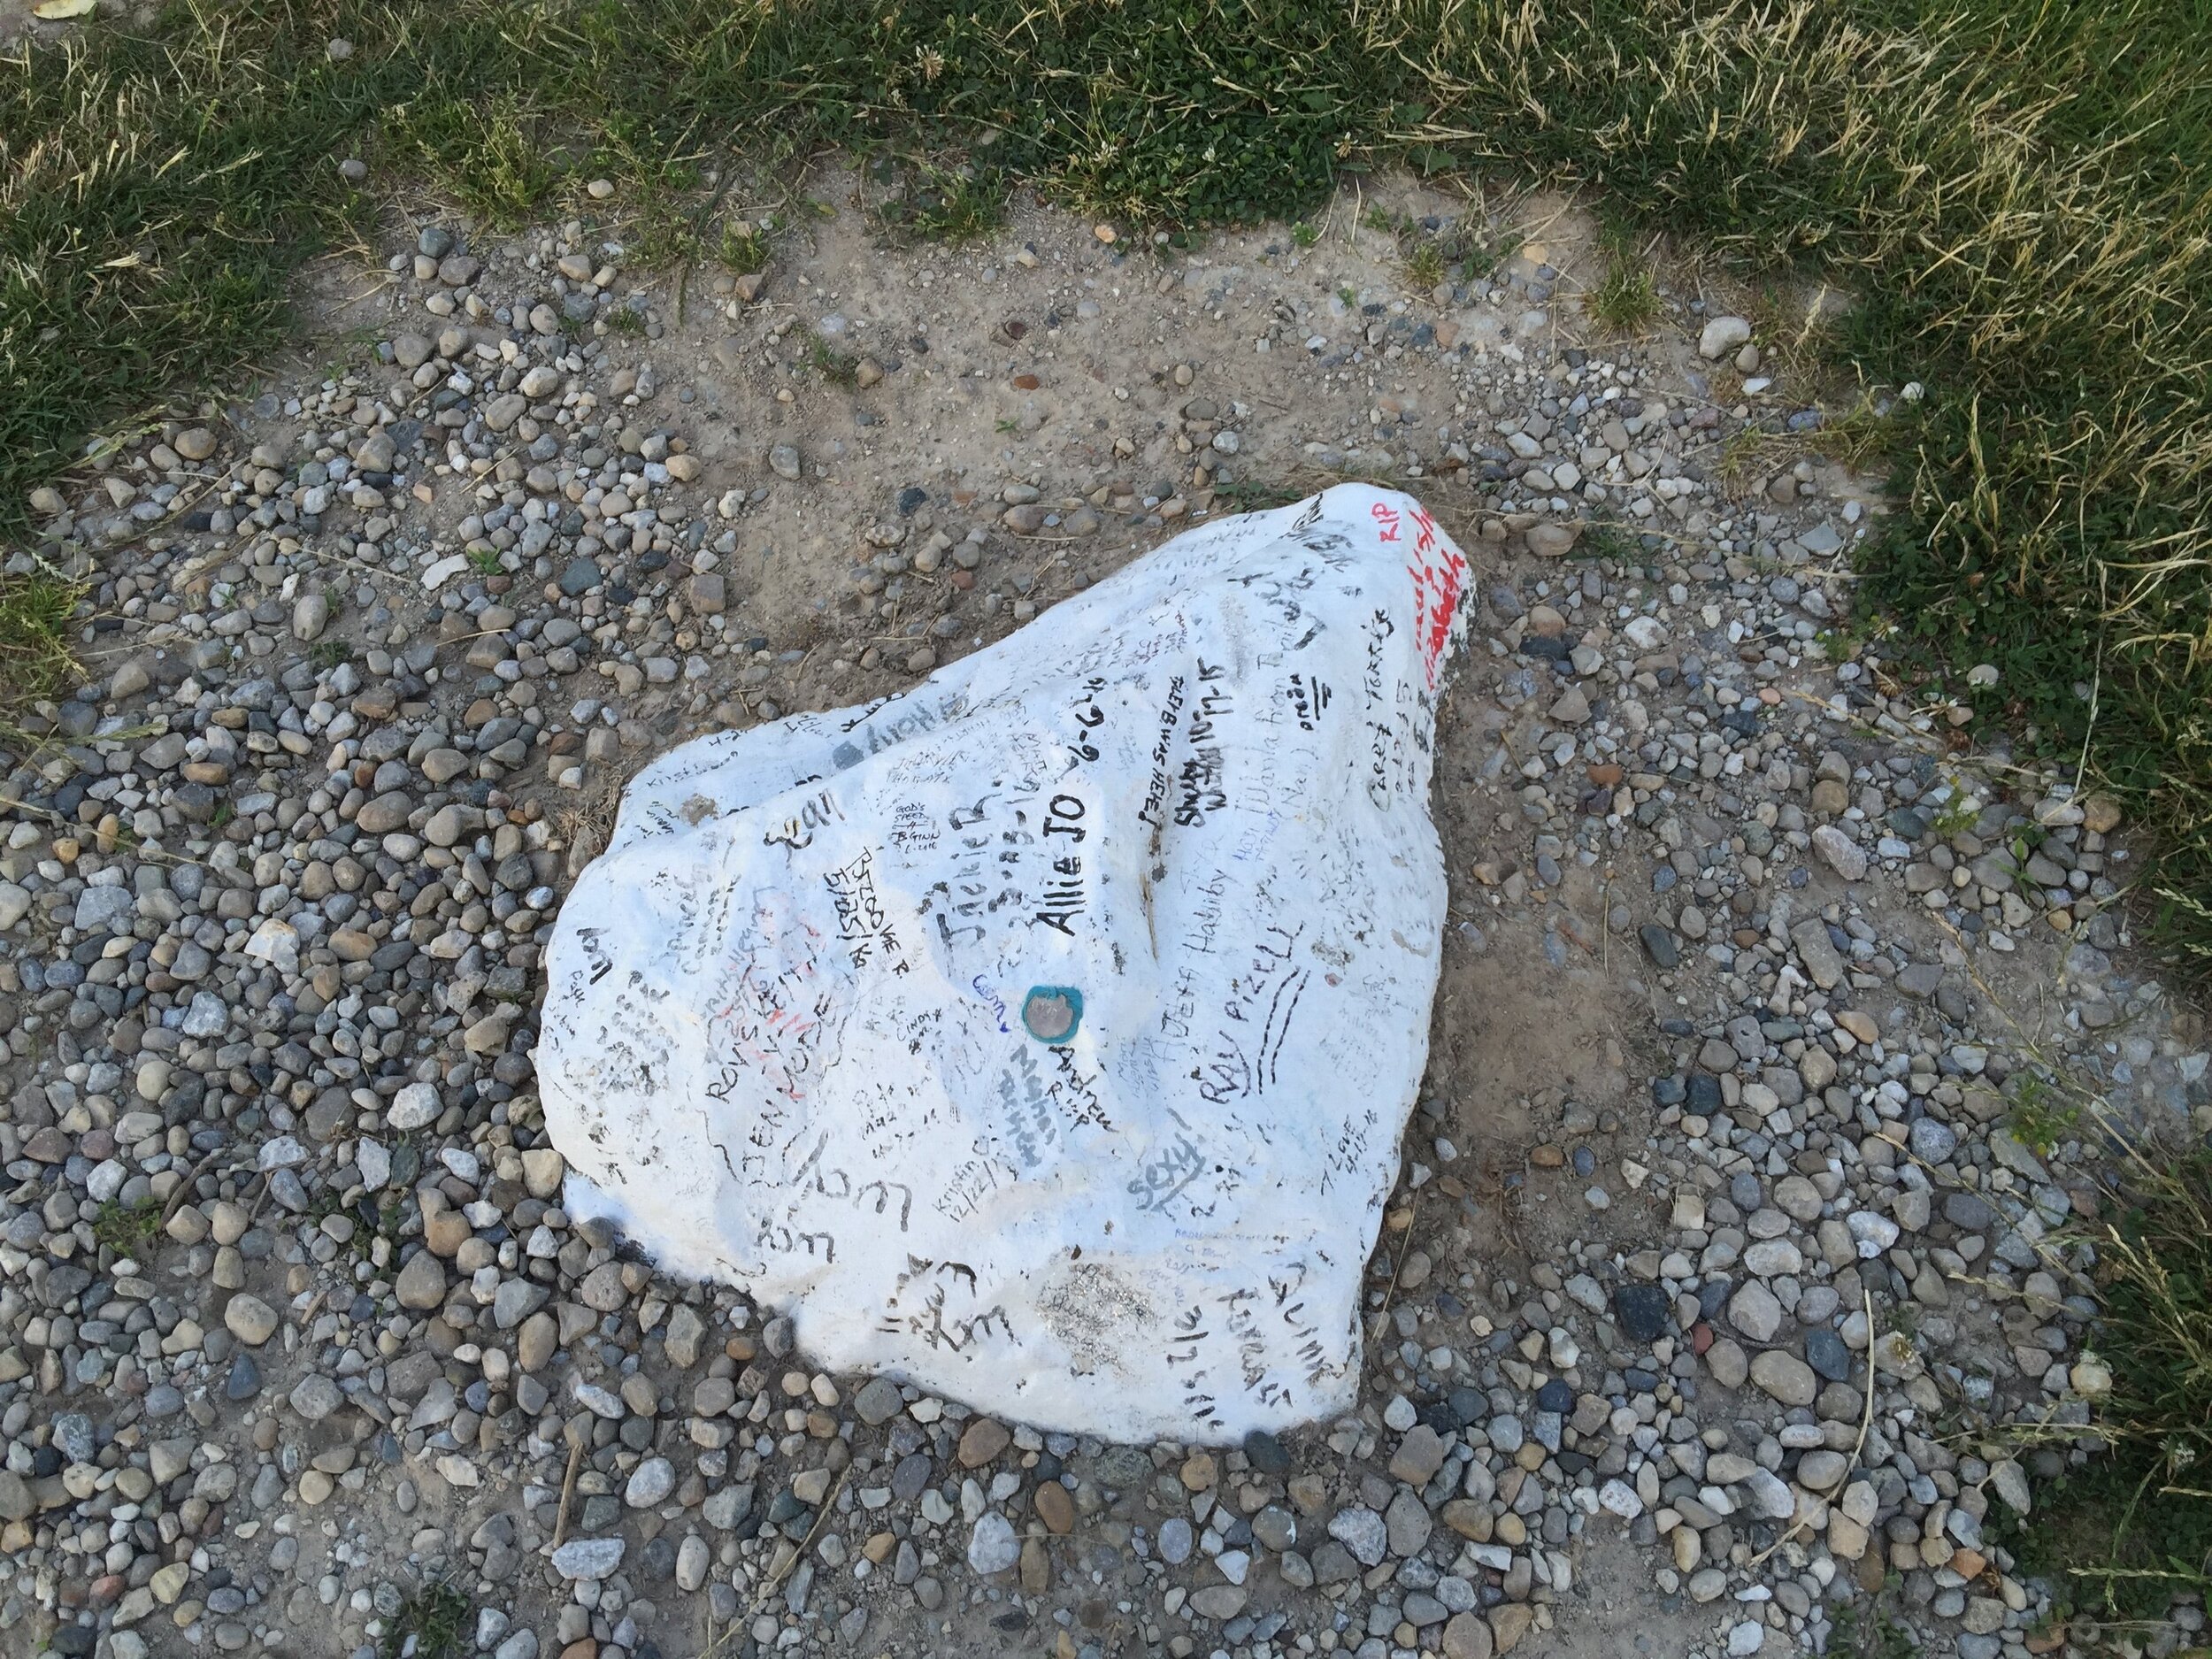  A rock near the headstone where well wishes are left by visitors. ©2016 Jill and Roger Pingleton 